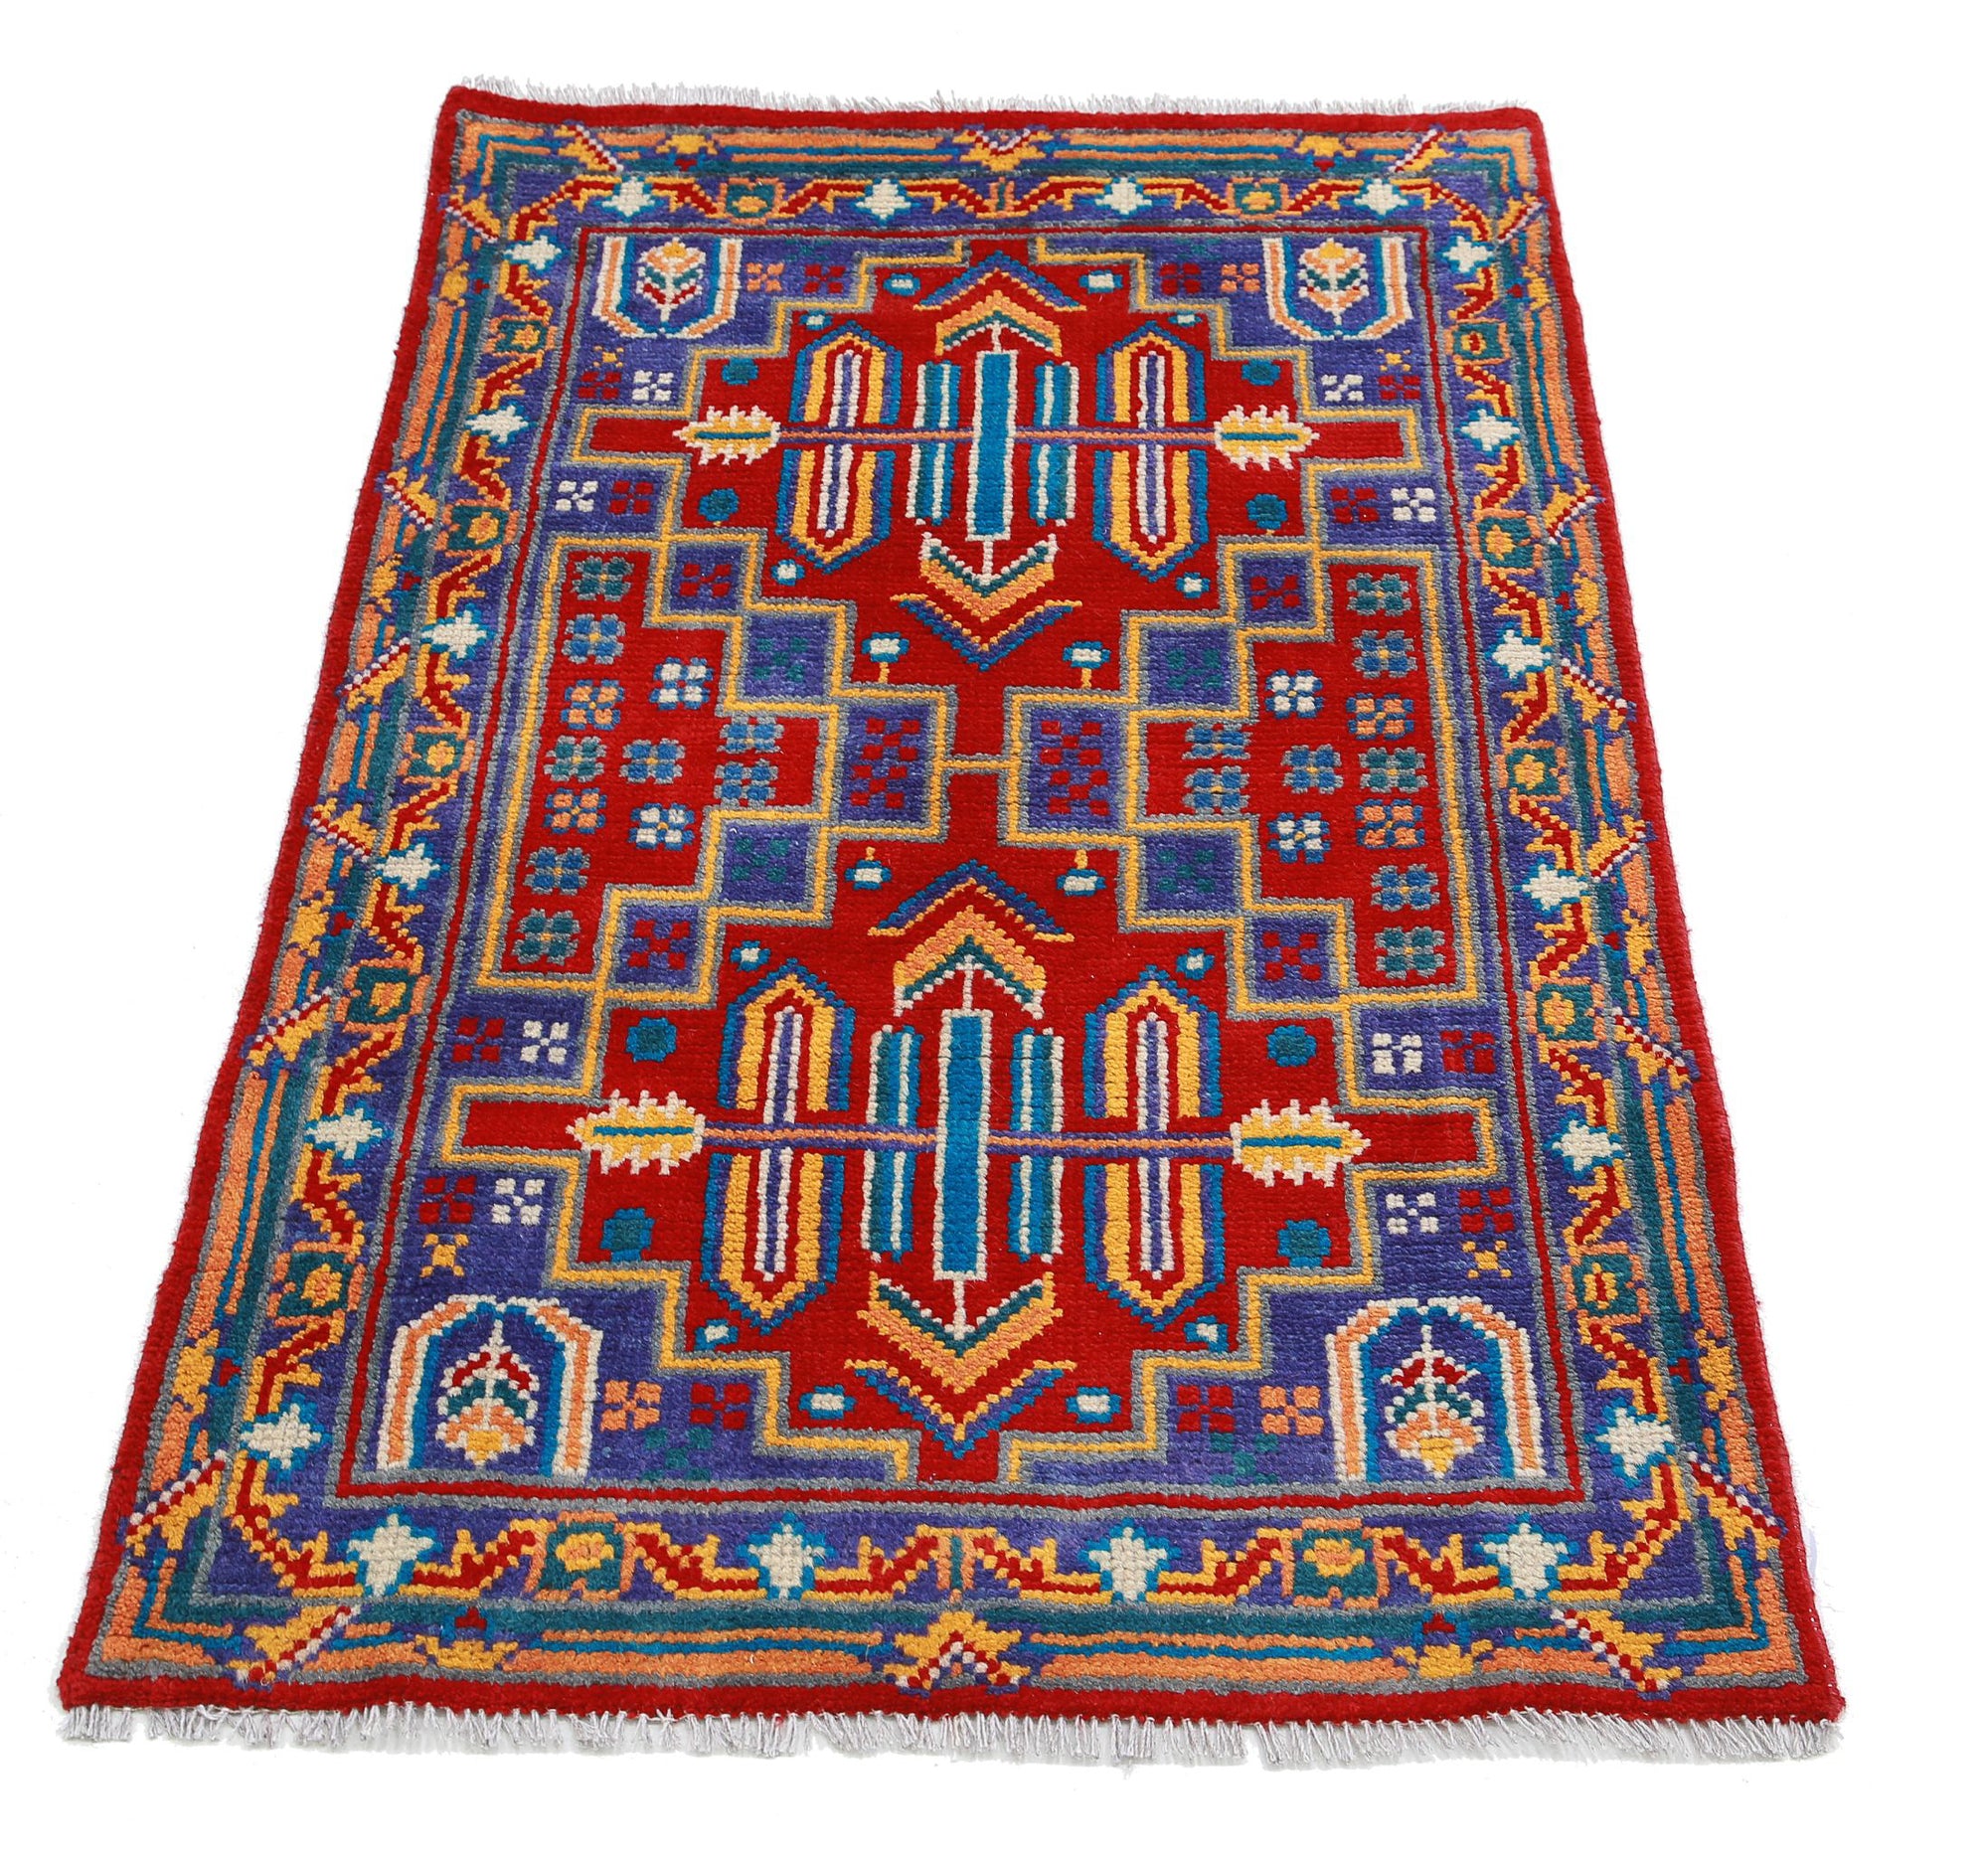 Revival-hand-knotted-qarghani-wool-rug-5014191-3.jpg